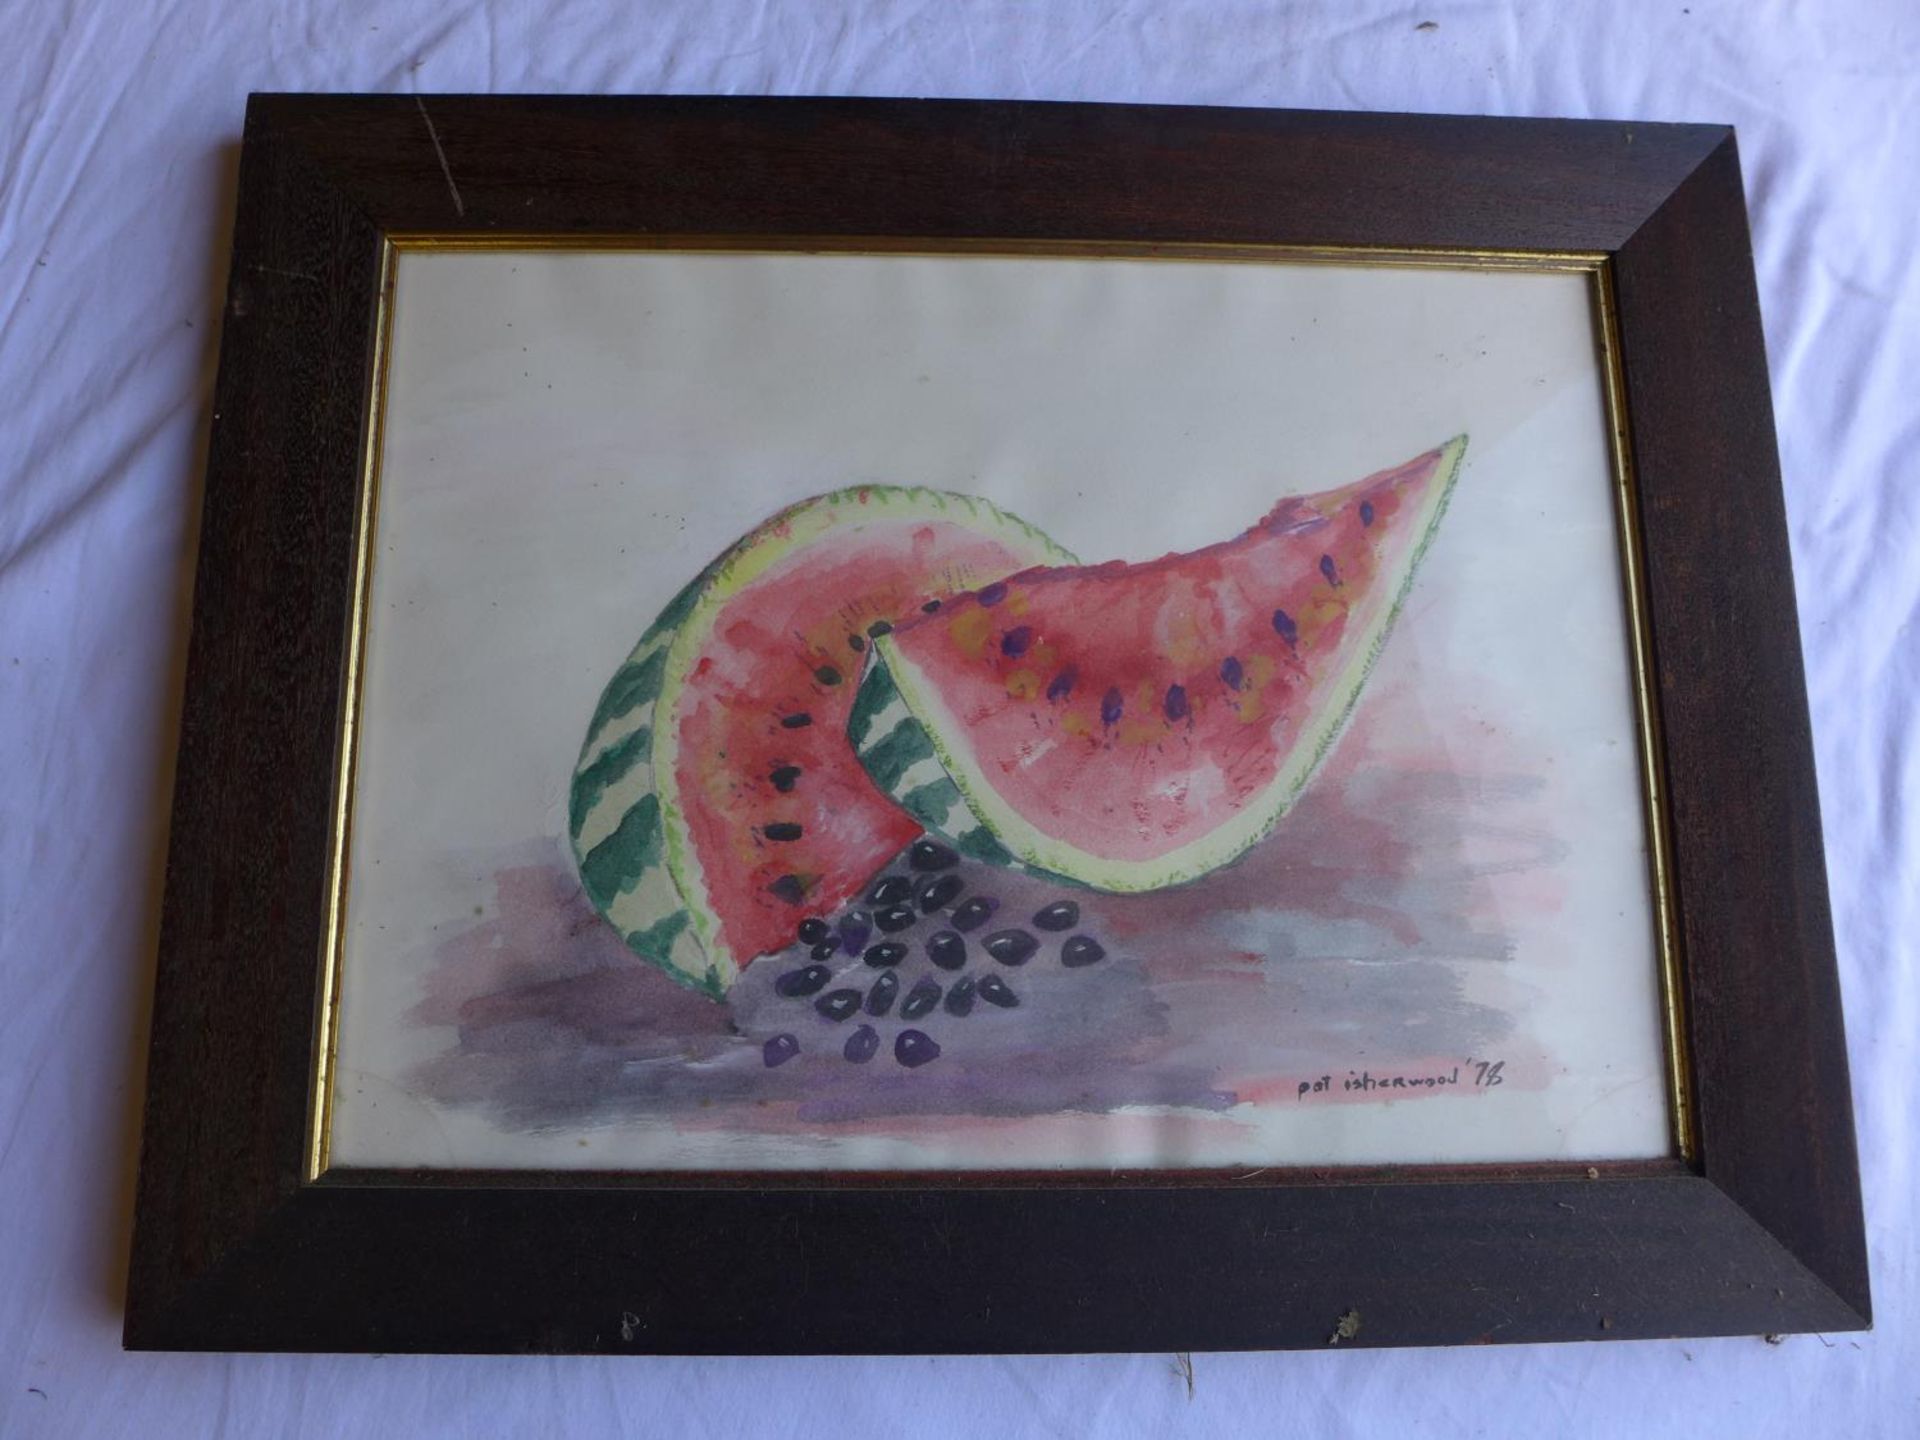 PAT ISHERWOOD, WATERCOLOUR OF FRUIT, SIGNED AND DATED 78, 34X47CM, FRAMED AND GLAZED, FROM THE